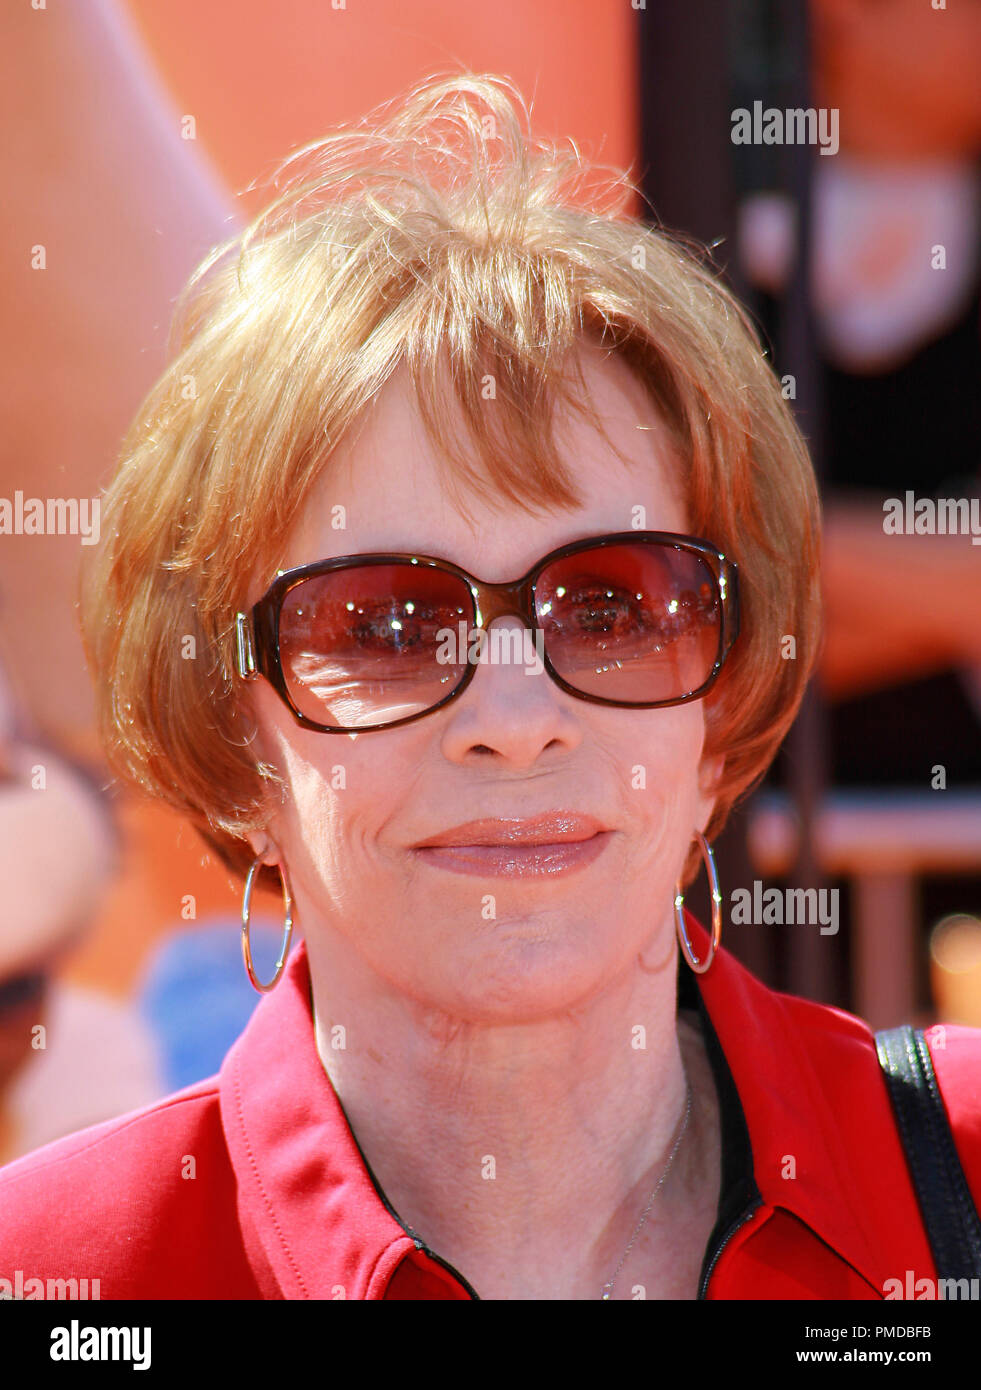 'Horton Hears a Who!' Premiere  Carol Burnett  3-8-2008 / Mann's Village Theatre / Westwood, CA / 20th Century Fox / Photo by Joseph Martinez File Reference # 23386 0015PLX   For Editorial Use Only -  All Rights Reserved Stock Photo